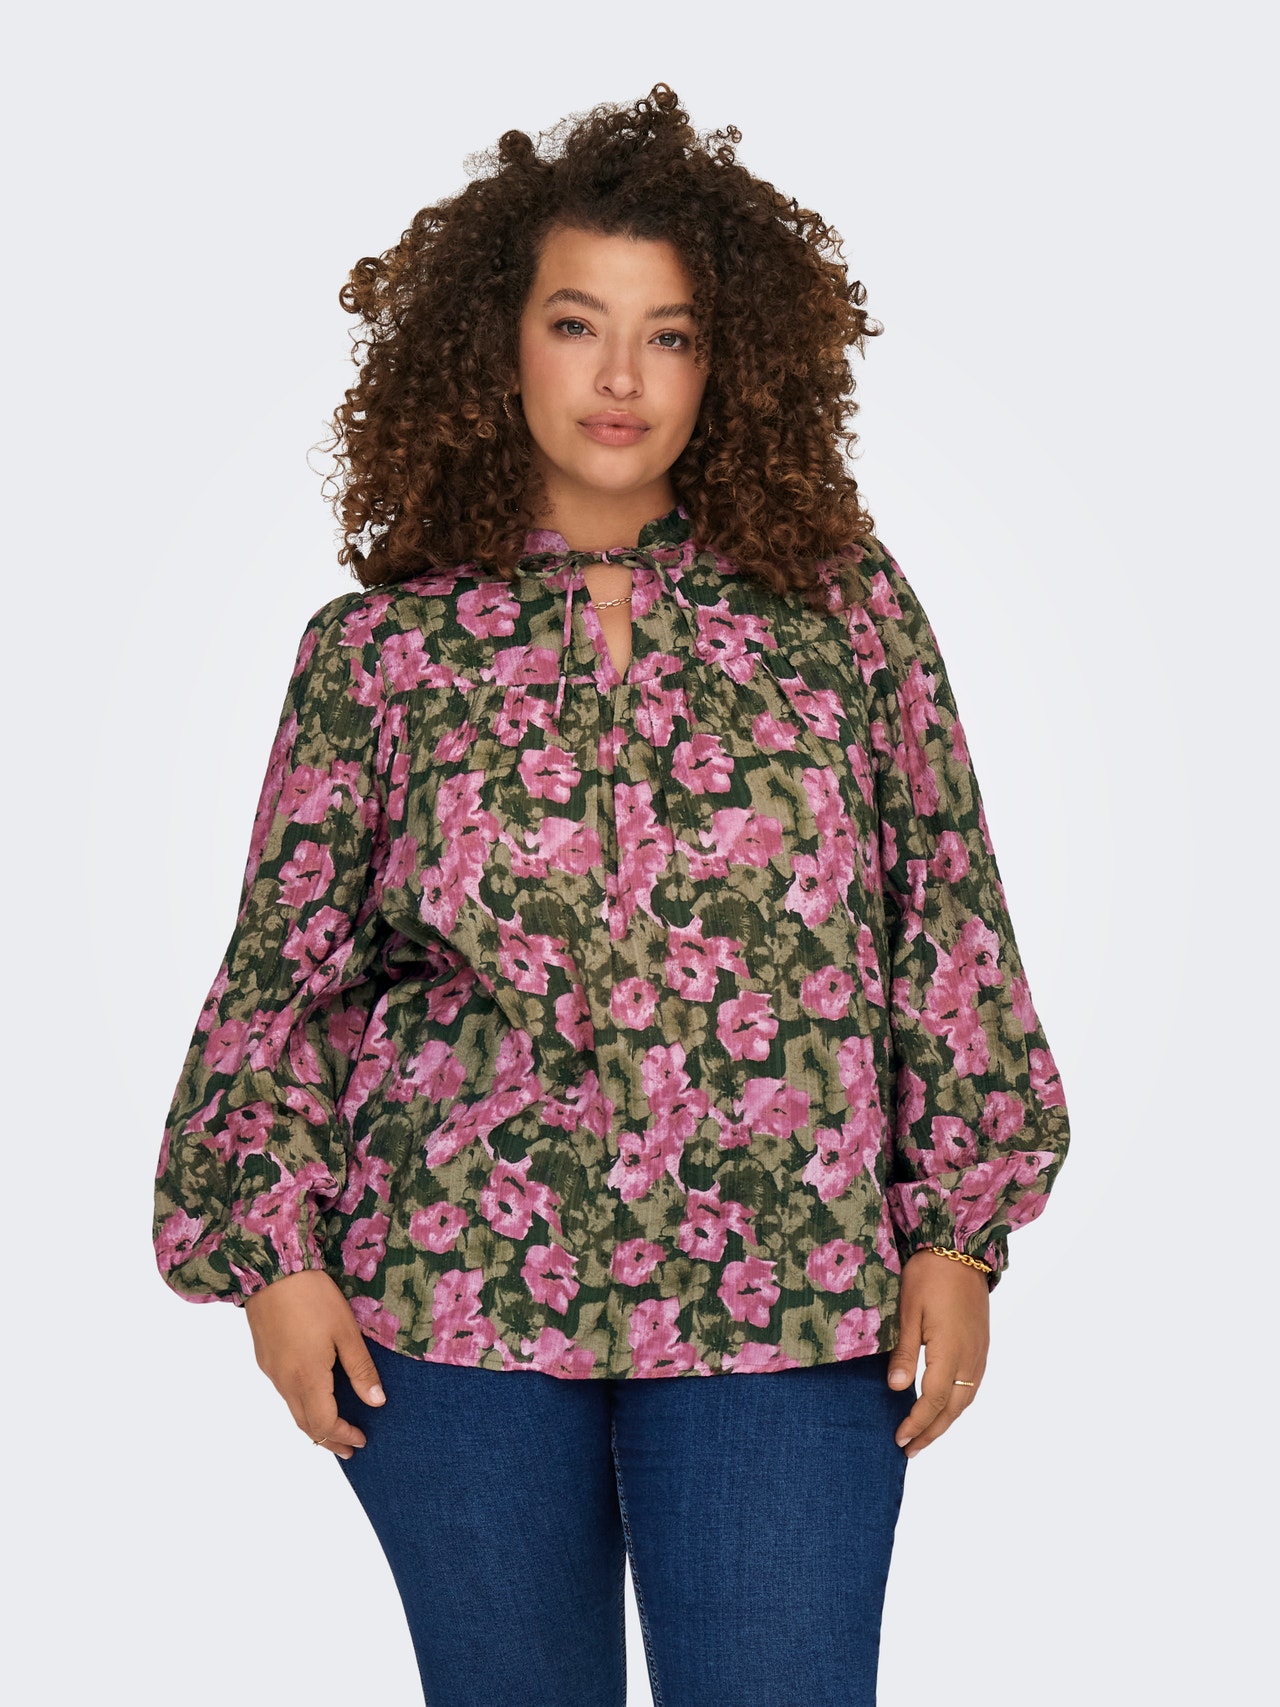 ONLY Curvy v-neck top -Winter Moss - 15302188